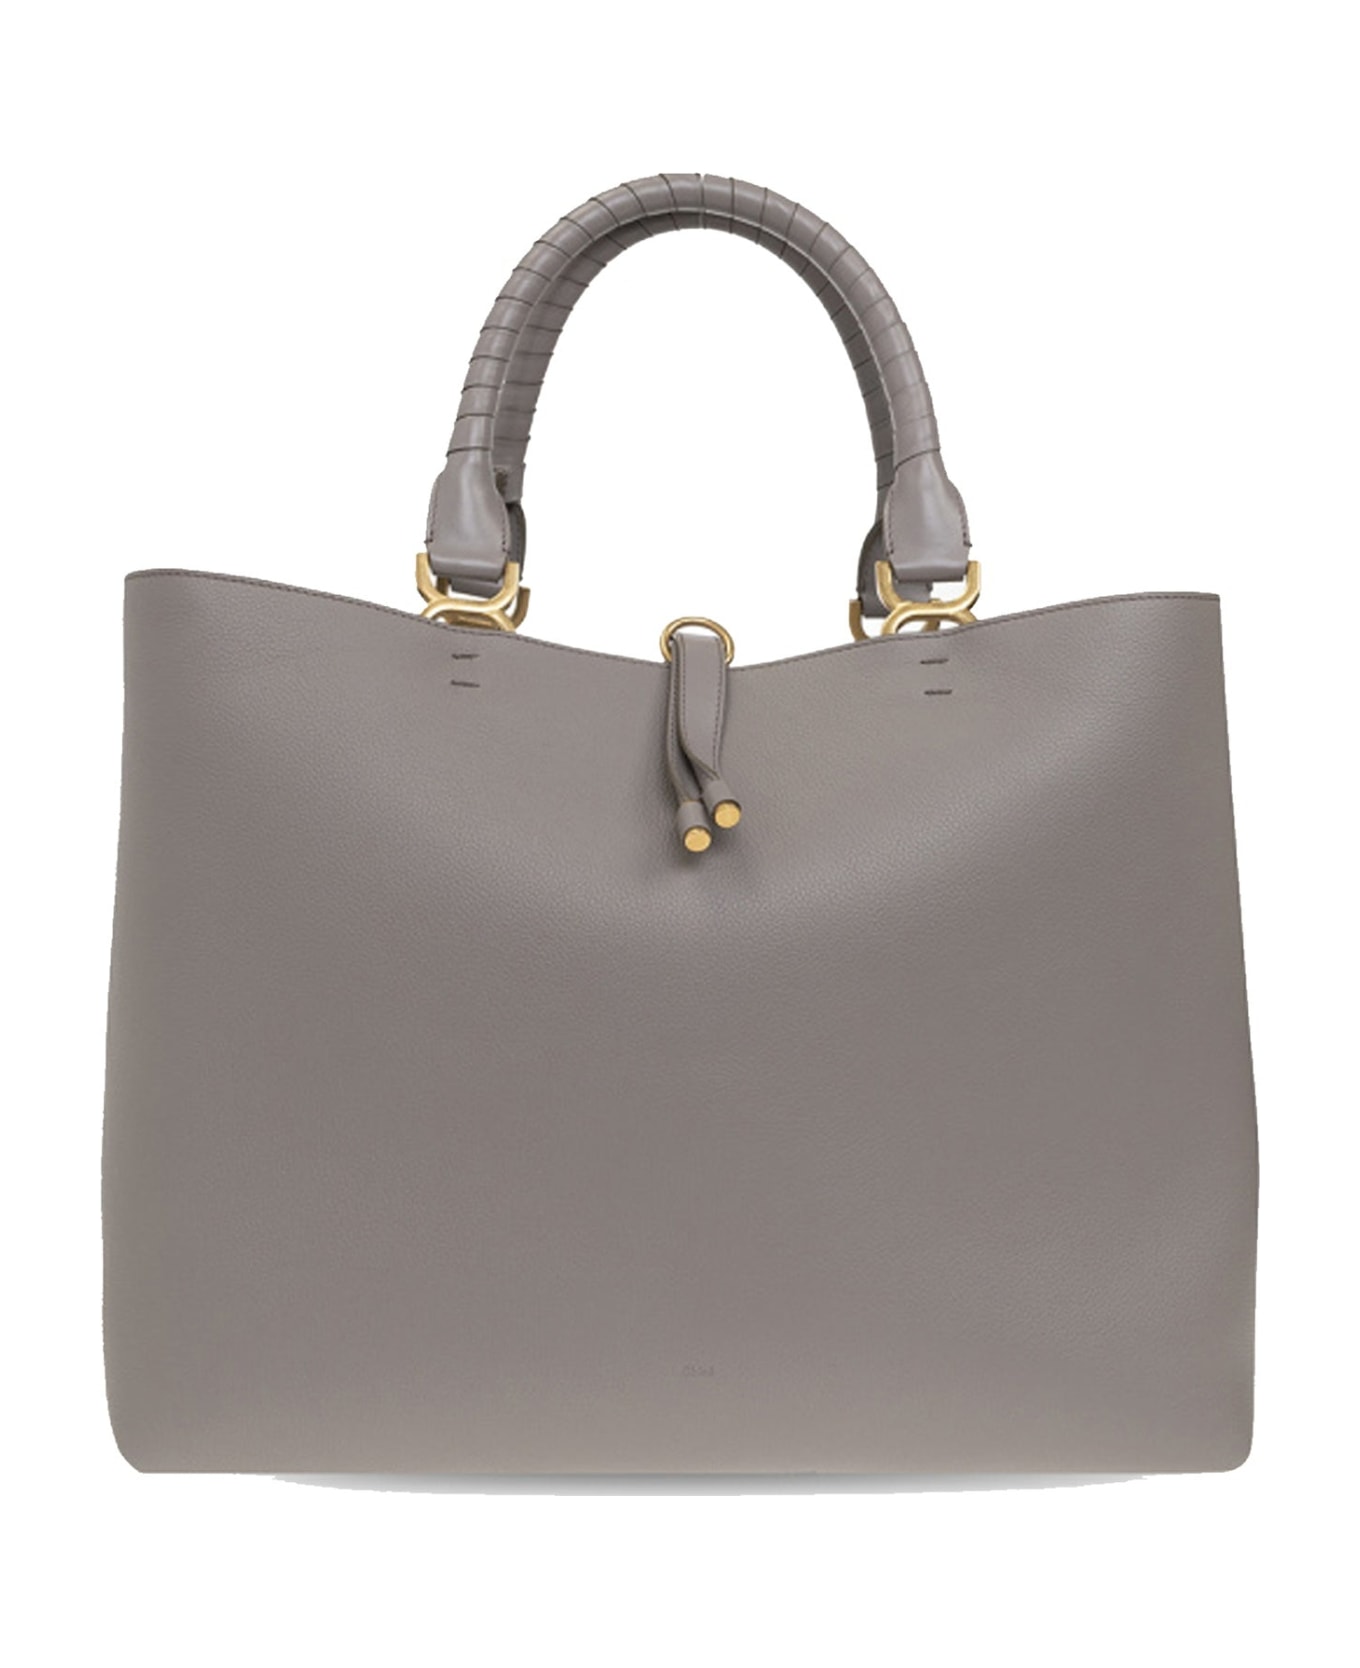 Chloé Marcie Tote Bag - Gray トートバッグ